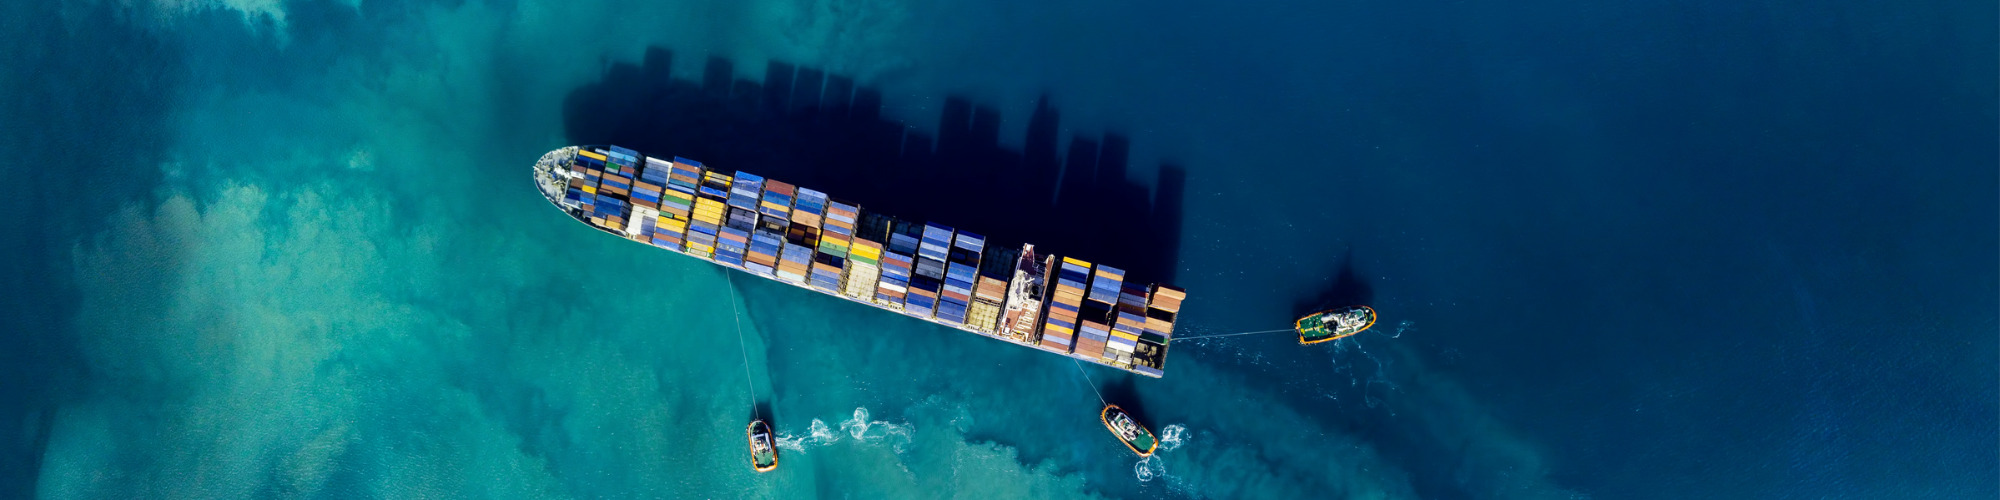 How to Identify & Manage Trade Sanction Risks in the Maritime Sector 